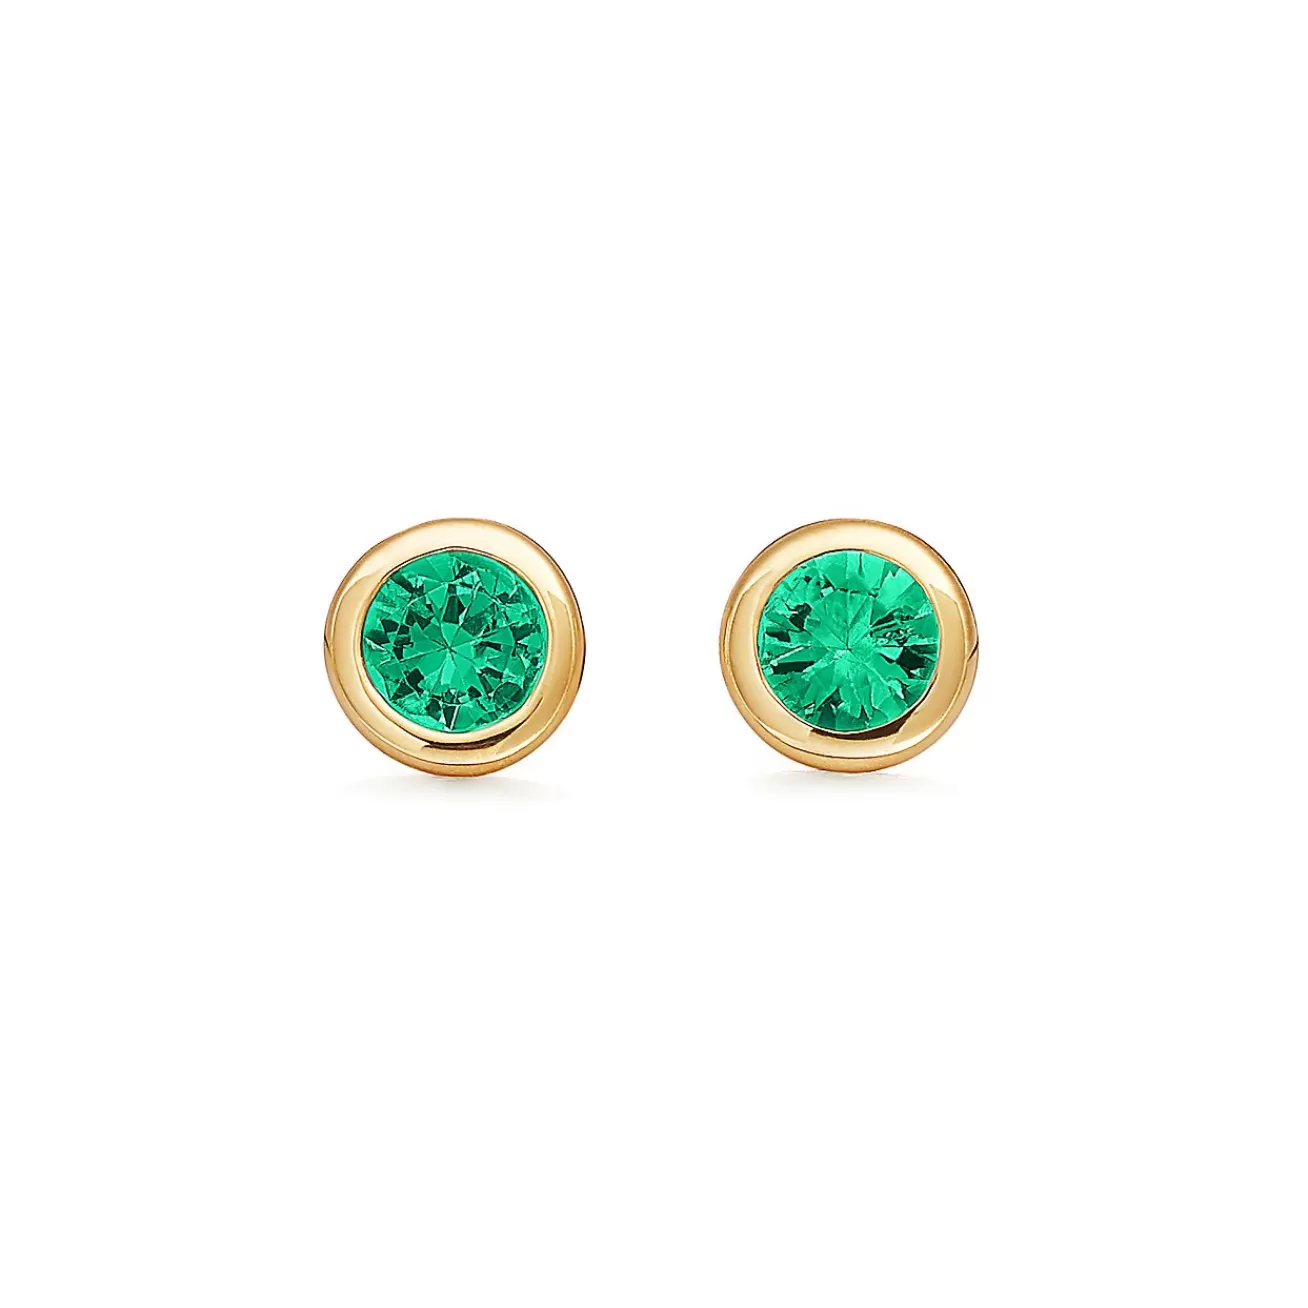 Tiffany & Co. Elsa Peretti® Color by the Yard earrings in 18k gold with emeralds. | ^ Earrings | Gifts for Her